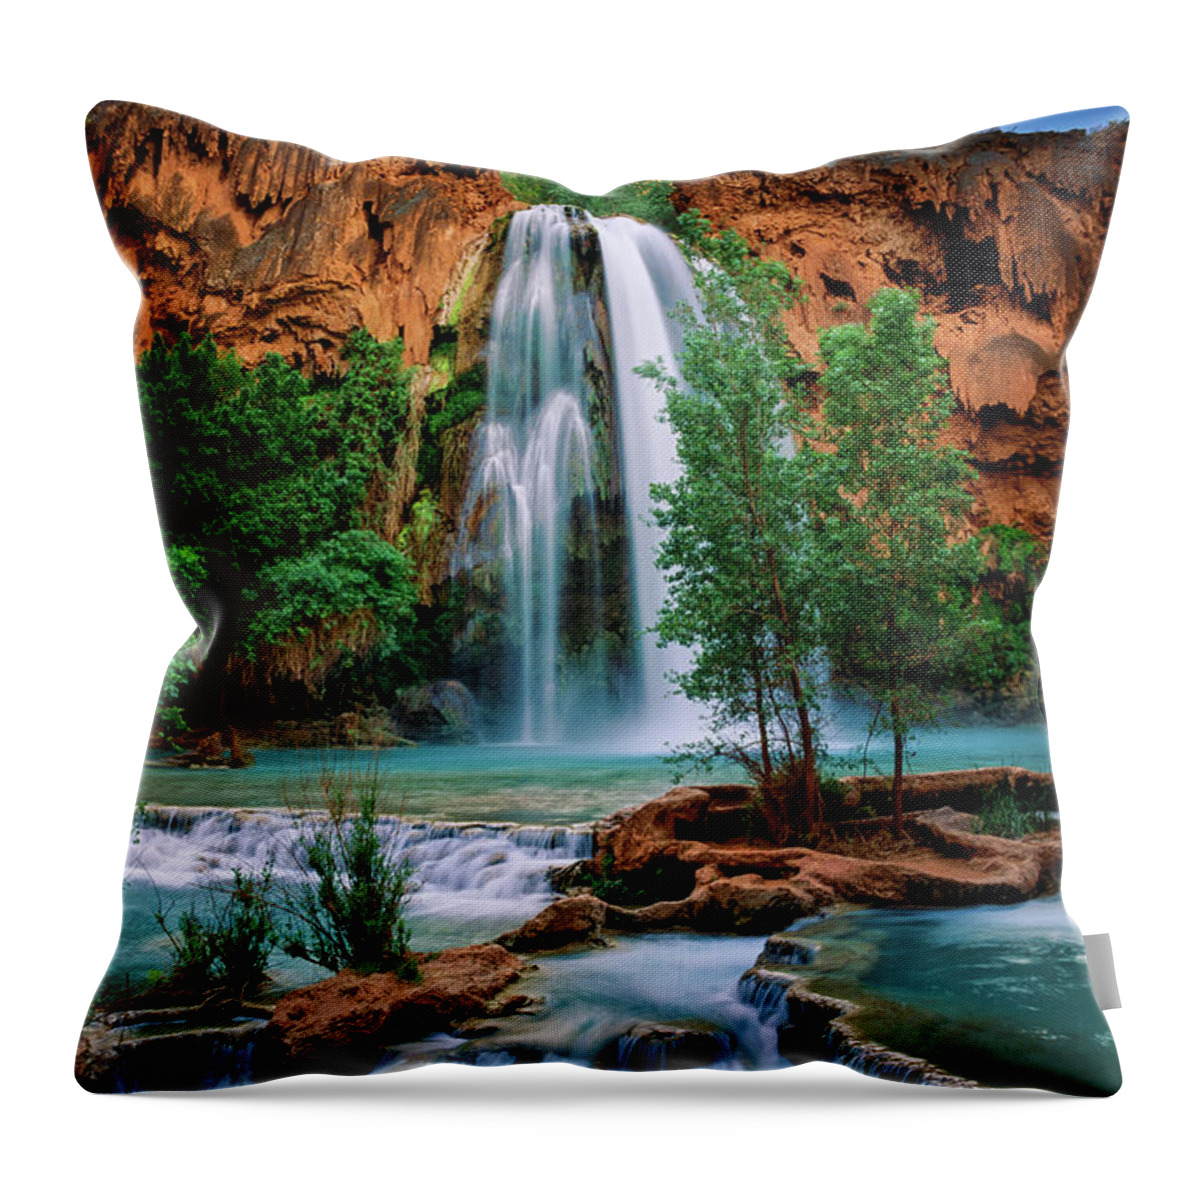 America Throw Pillow featuring the photograph Havasu Cascades by Inge Johnsson